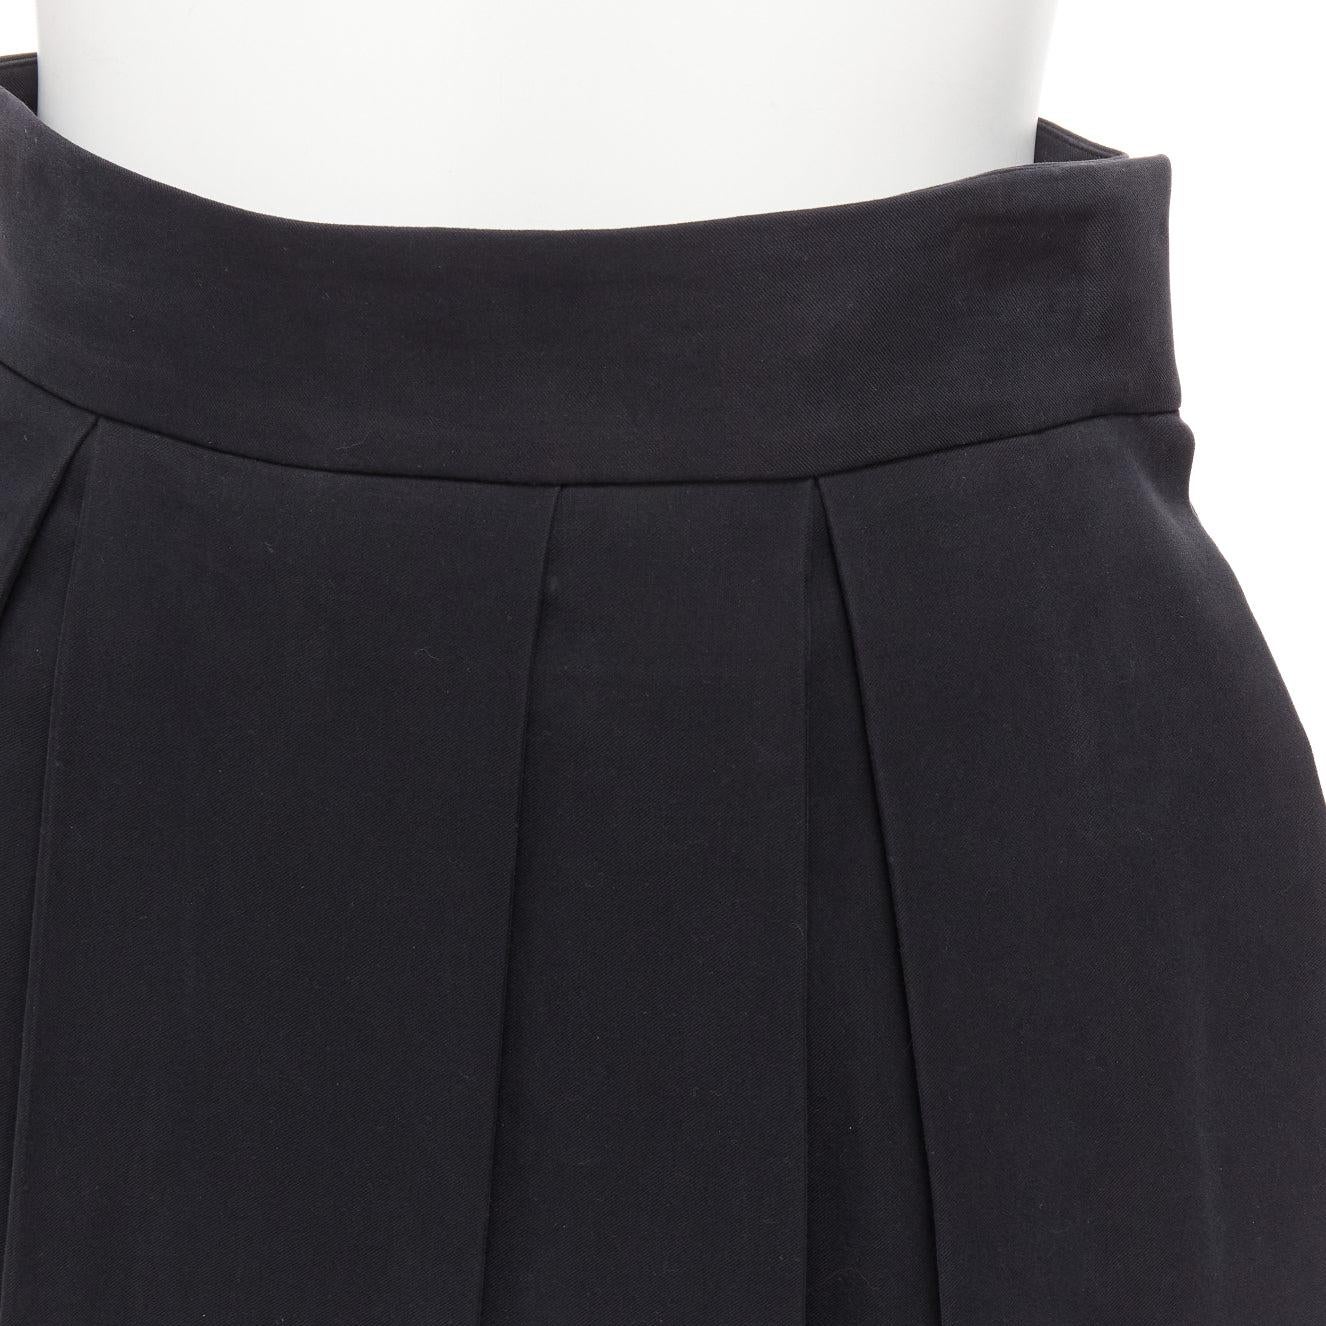 THE ROW black cotton horn button asymmetric pleats A line midi skirt US2 S
Reference: LNKO/A02323
Brand: The Row
Designer: Mary Kate and Ashley Olsen
Material: Cotton
Color: Black
Pattern: Solid
Closure: Zip Fly
Lining: Black Fabric
Extra Details: